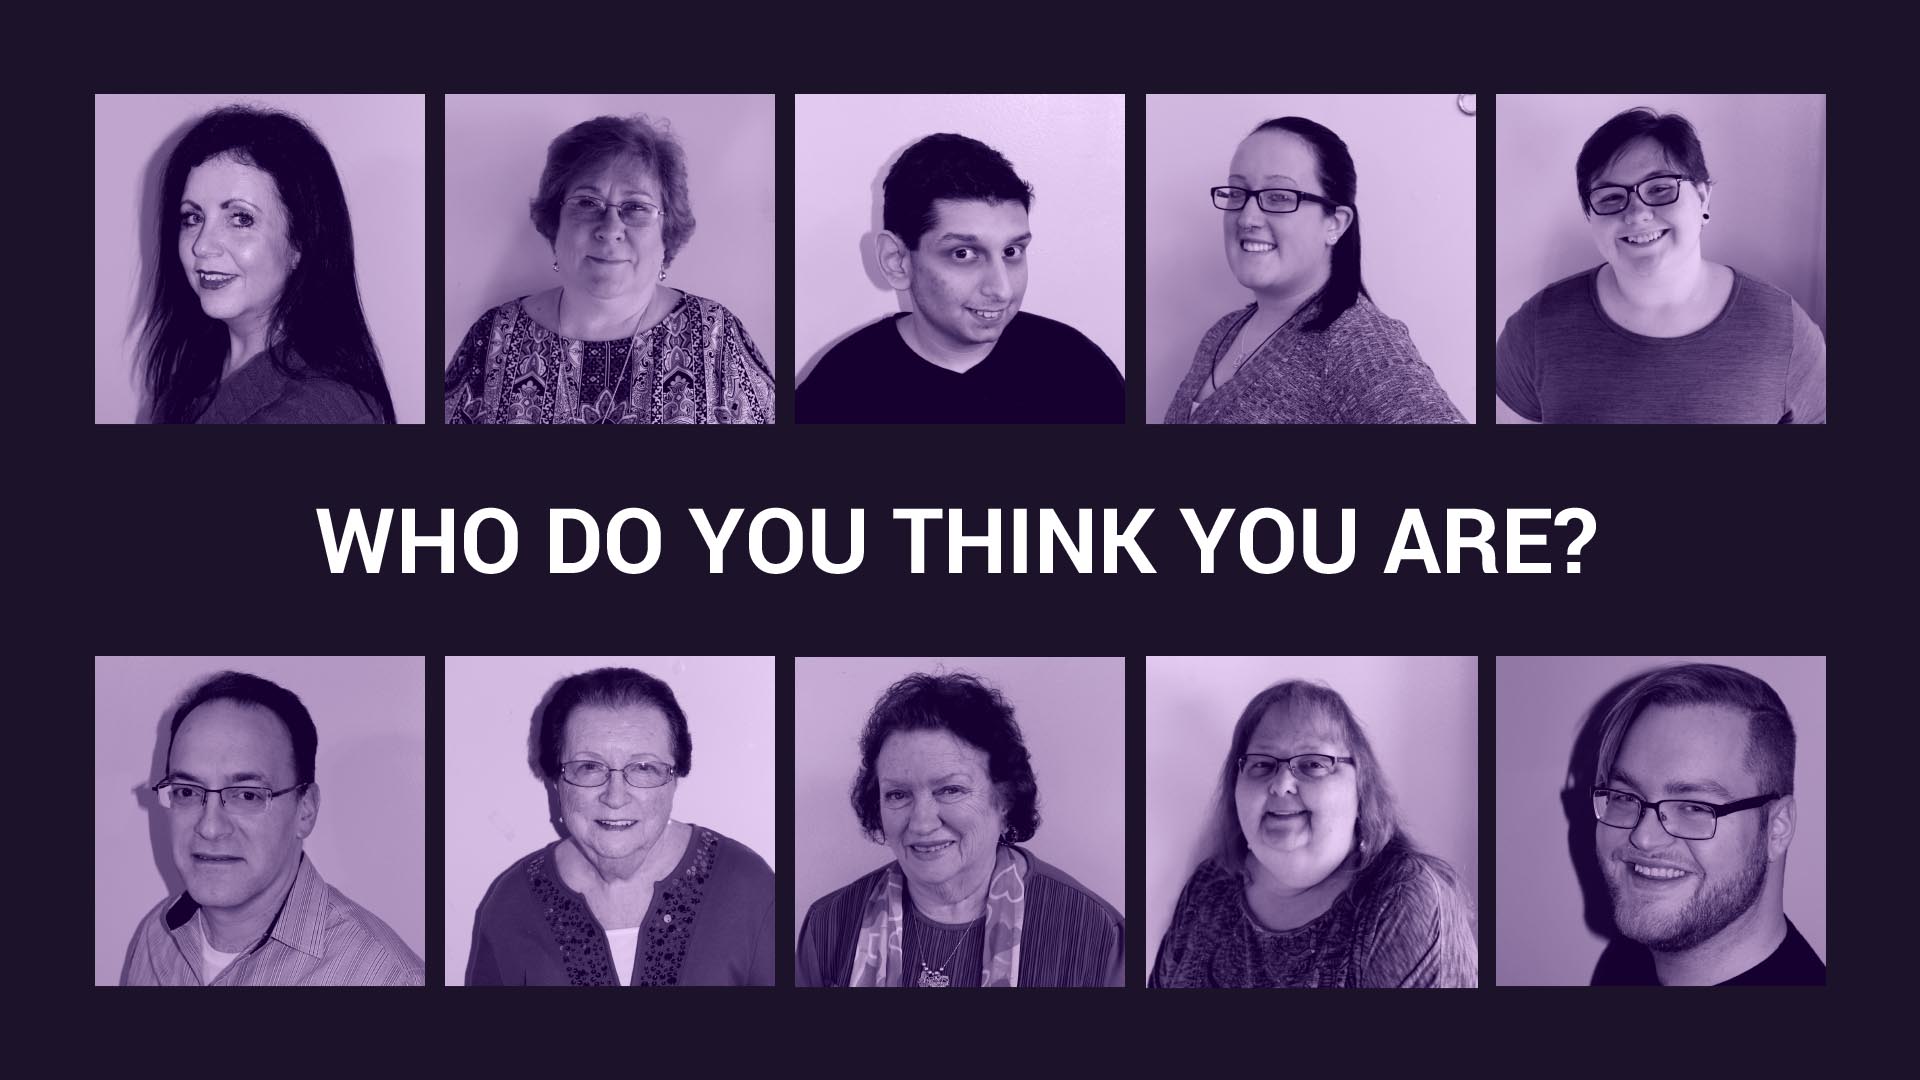 "Who Do You Think You Are?" Message Series